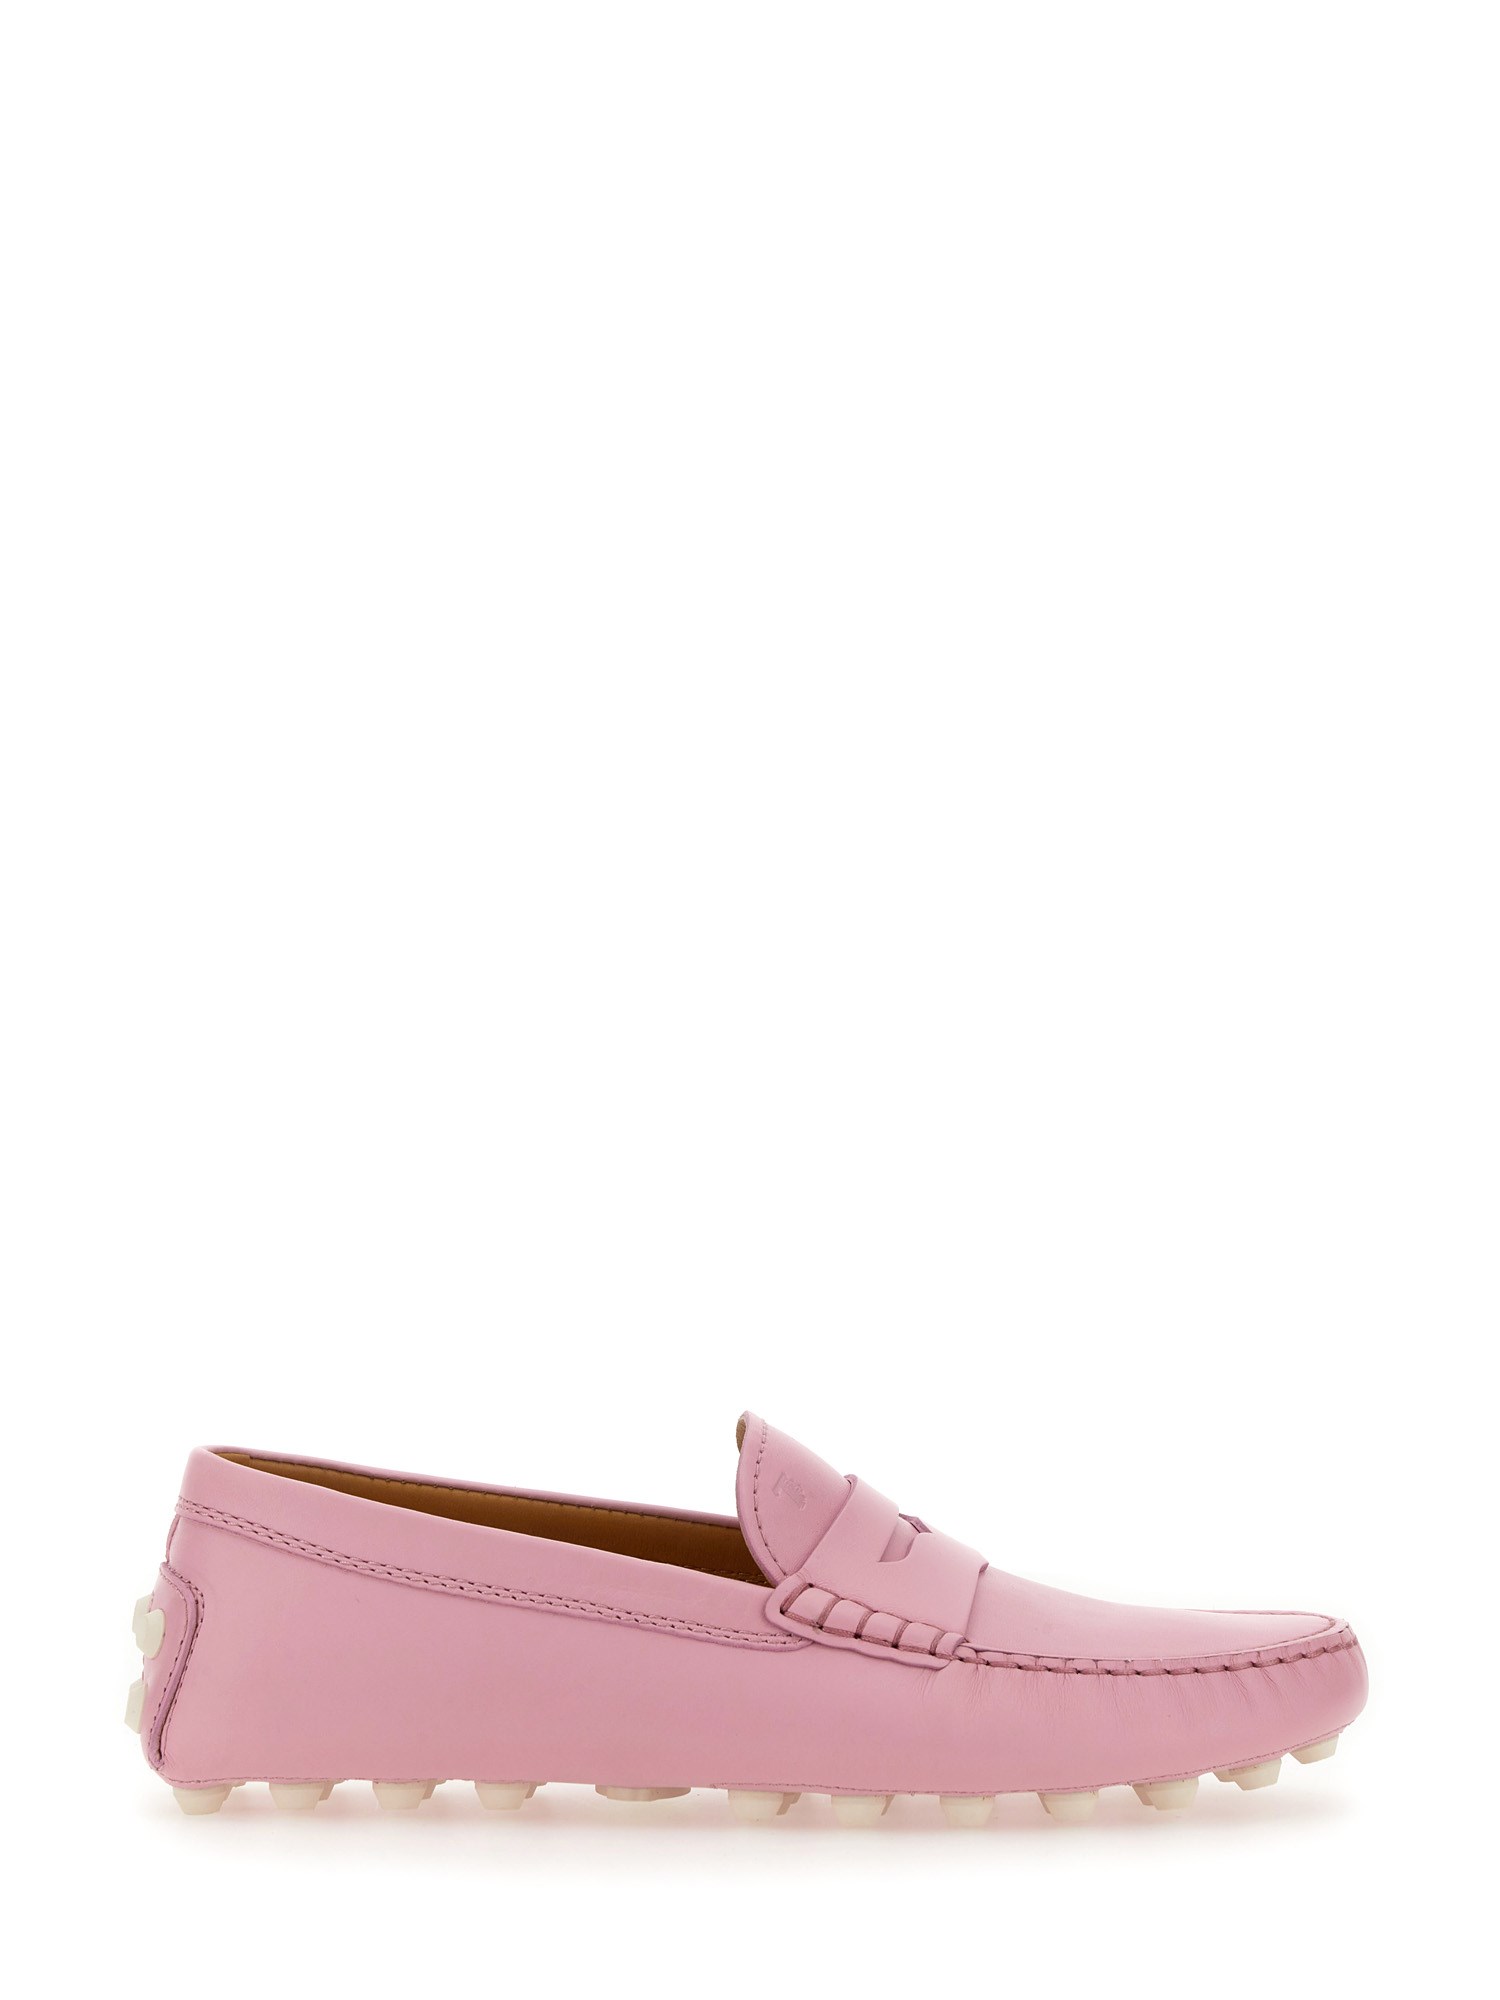 tod's rubberized moccasin